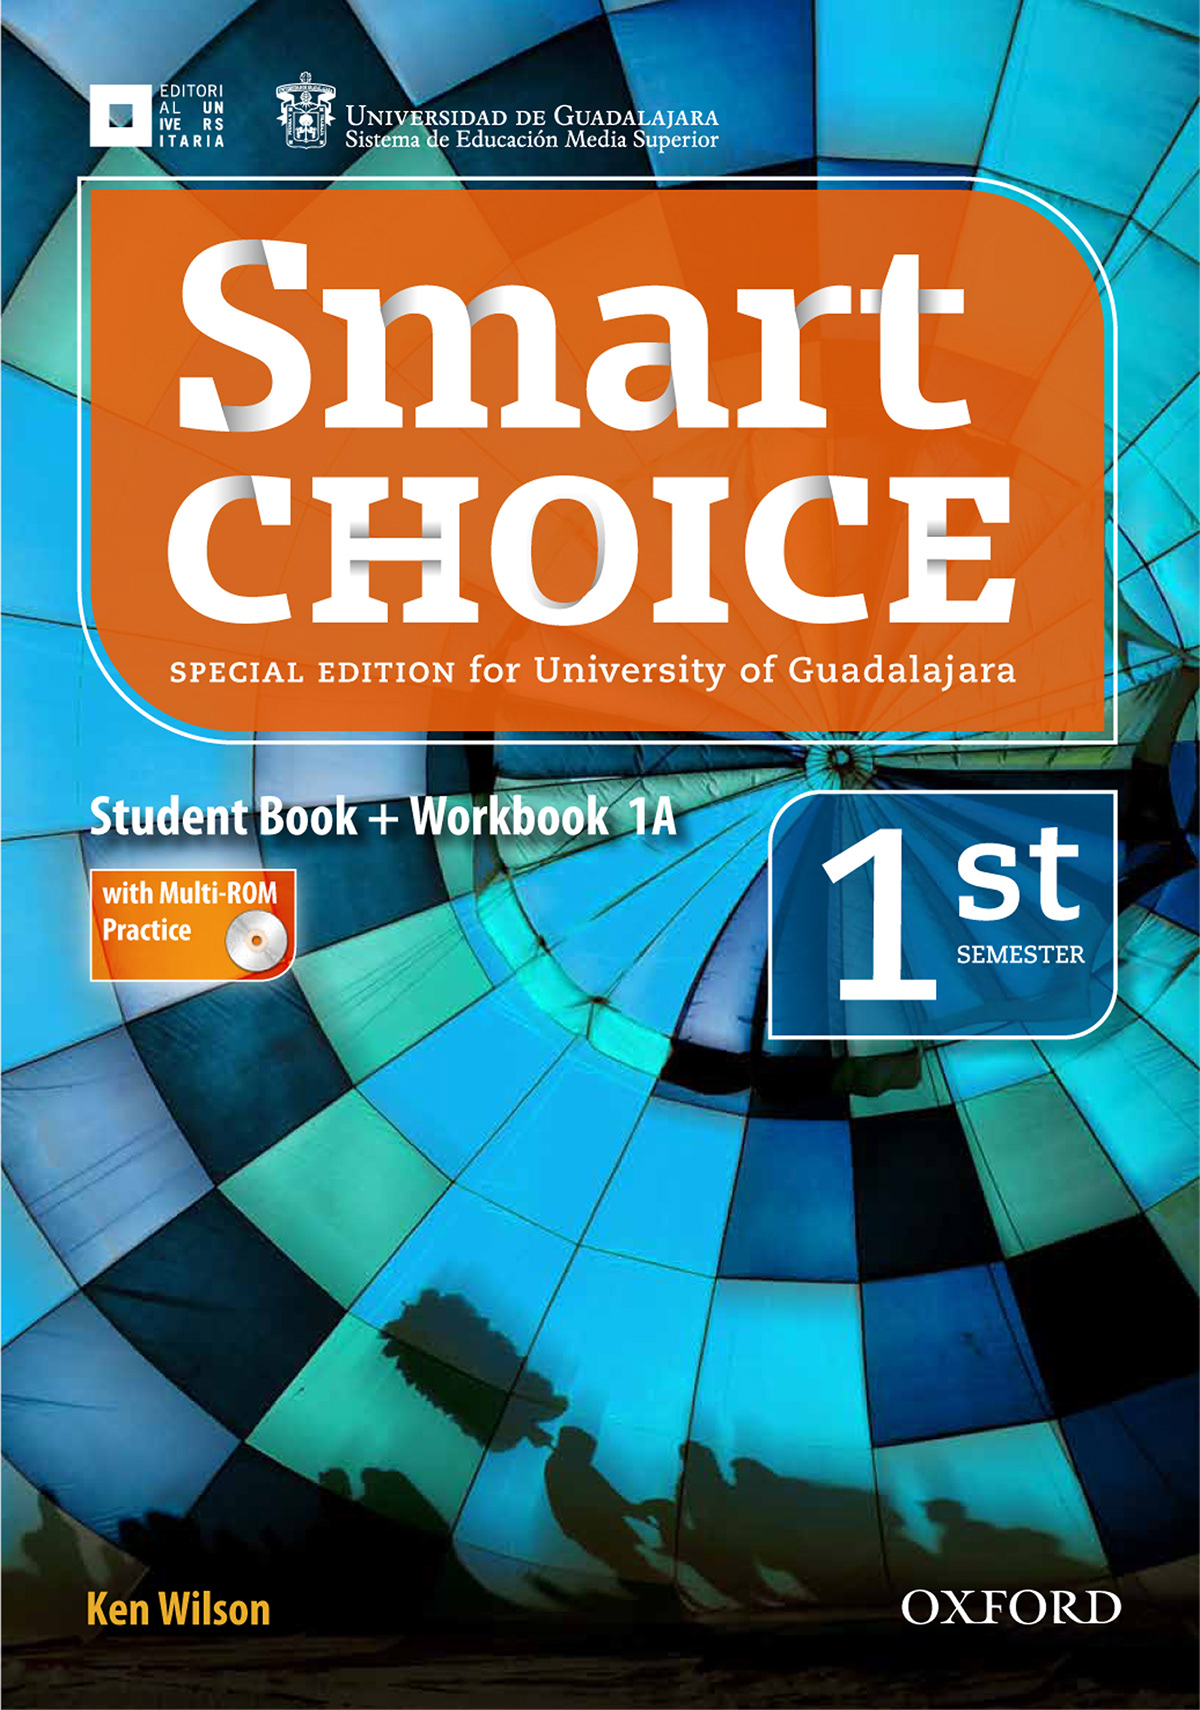 oxford  workbook  studentbook  smart choice  english  language  cover  special edition